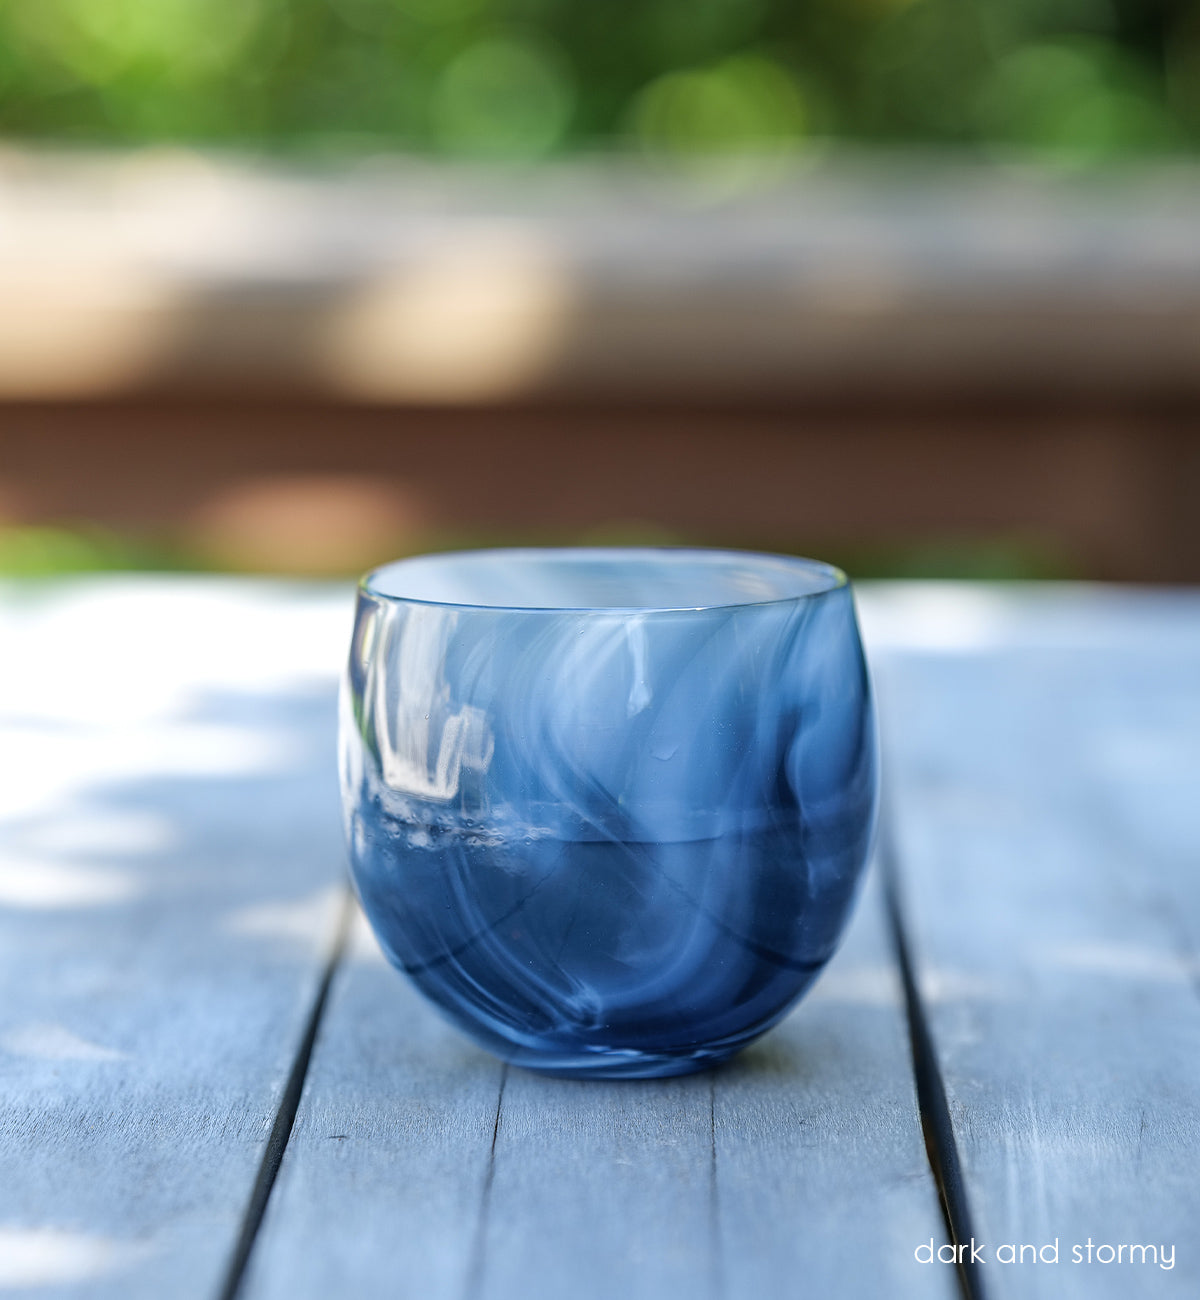 deep blue and white swirled together to create this one-of-a-kind hand-blown glass.